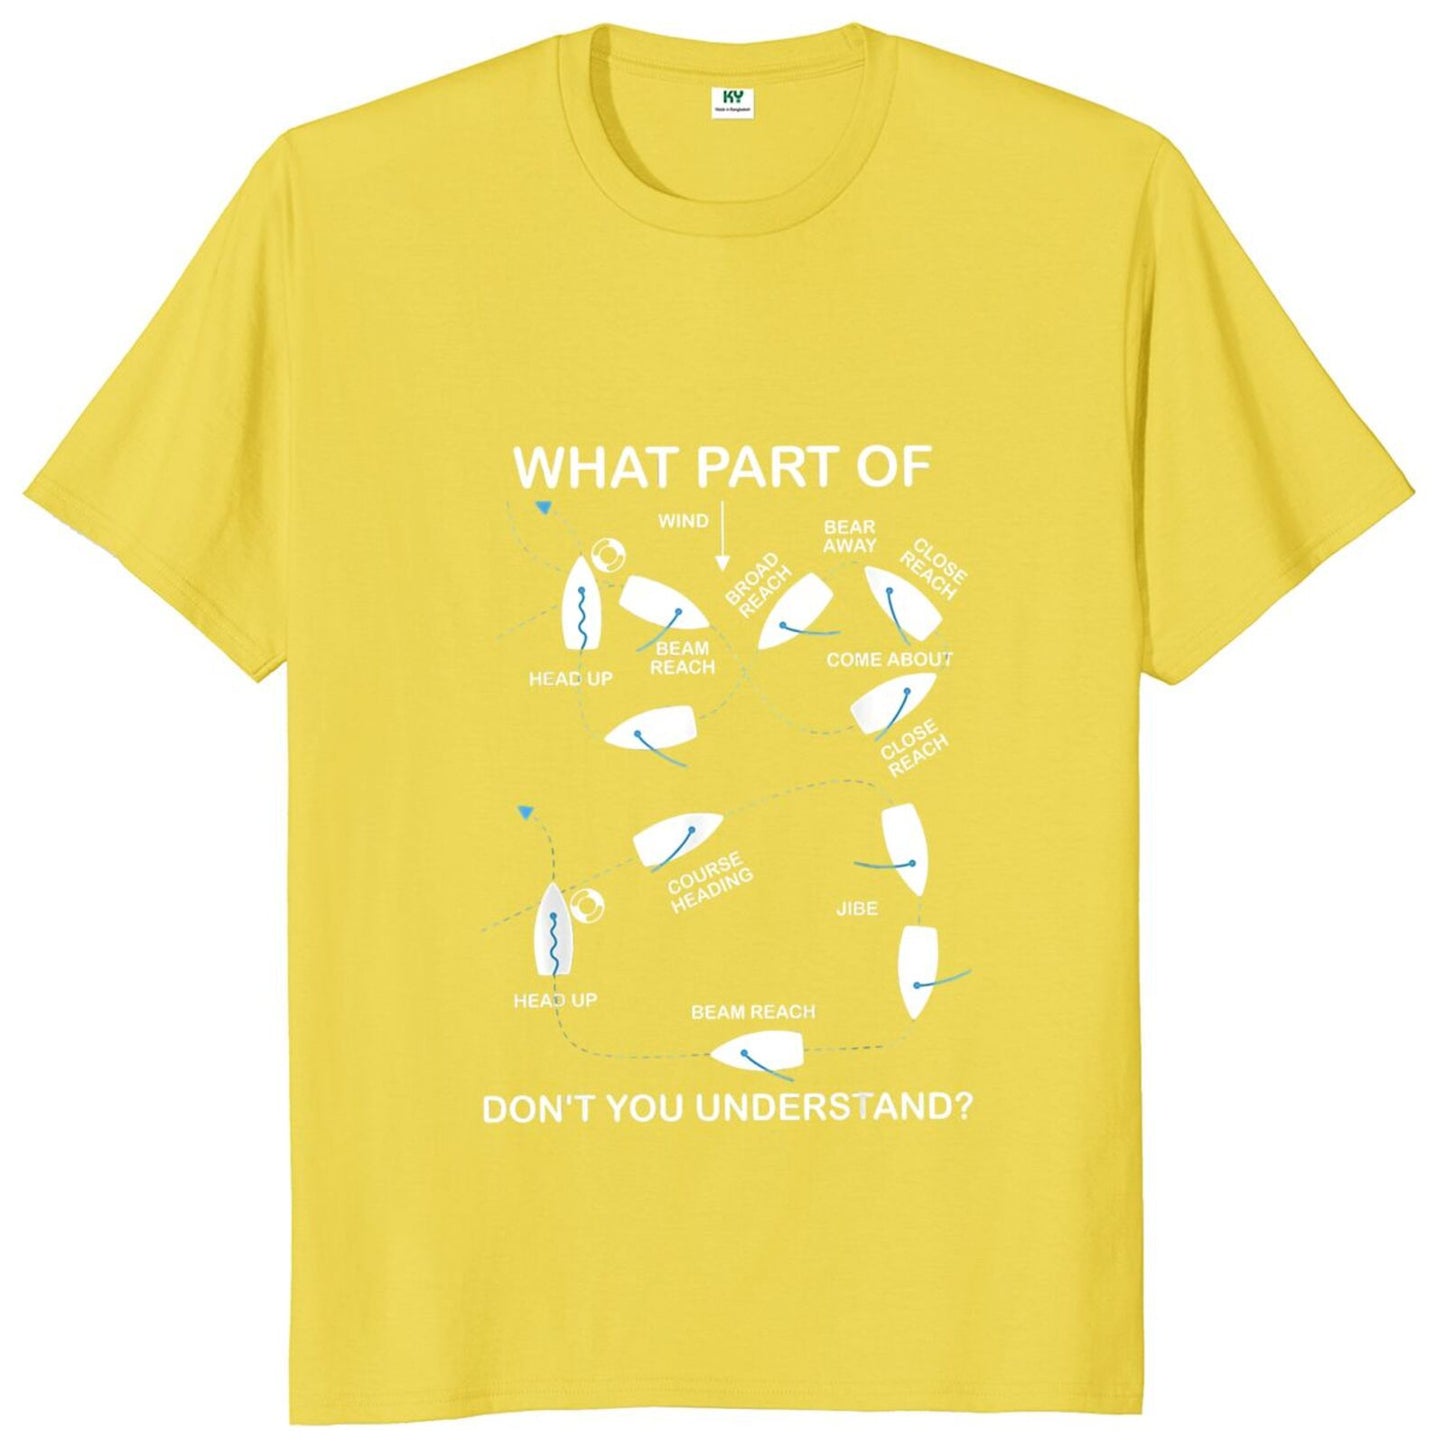 What Part Of Ship Don't You Understand T Shirt Funny Sailing Ship Lovers Gift Tee   Tops Casual Unisex Cotton T-shirts EU Size